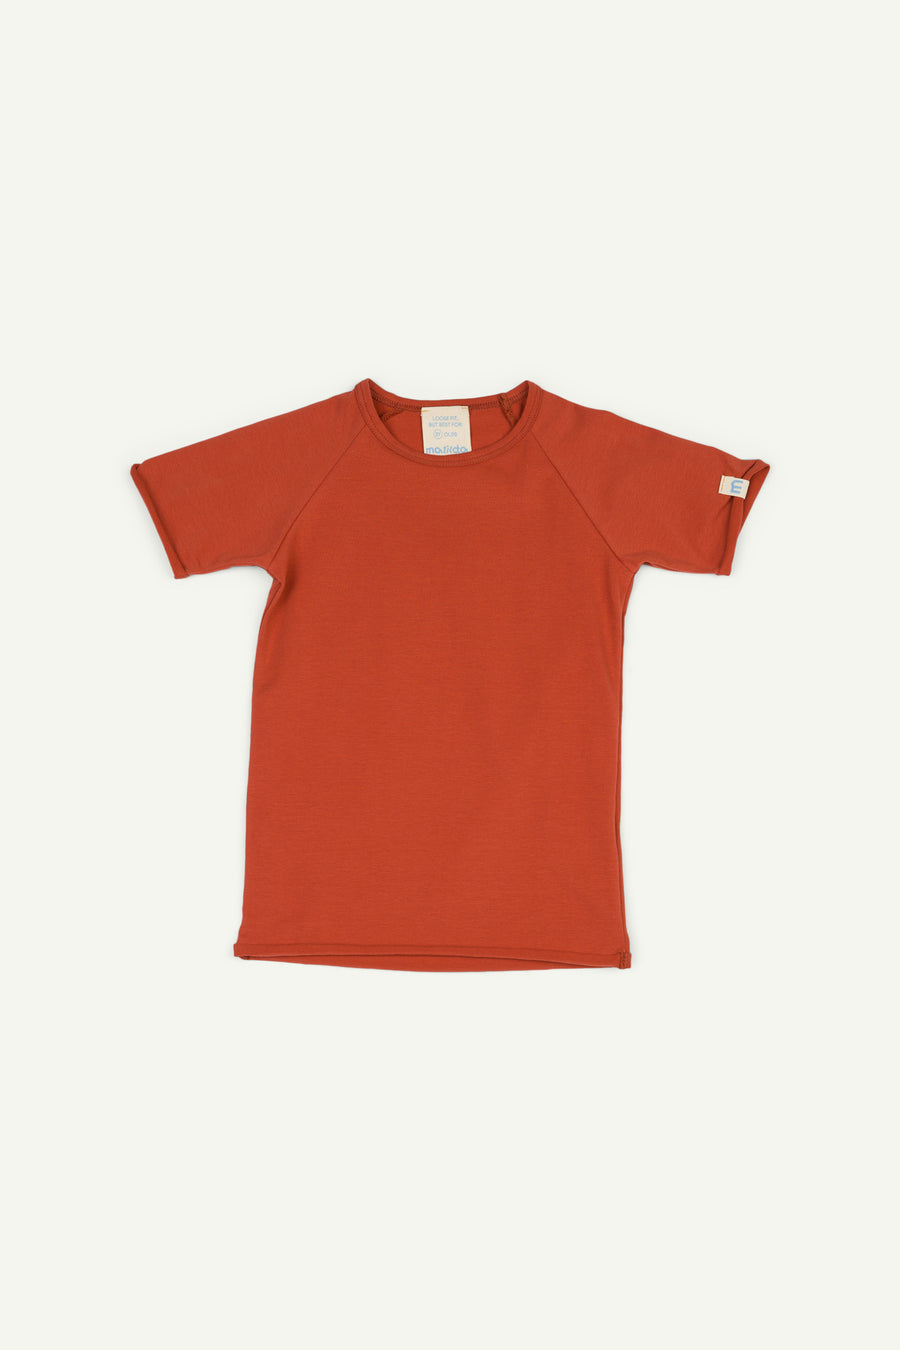 Red T's short sleeve